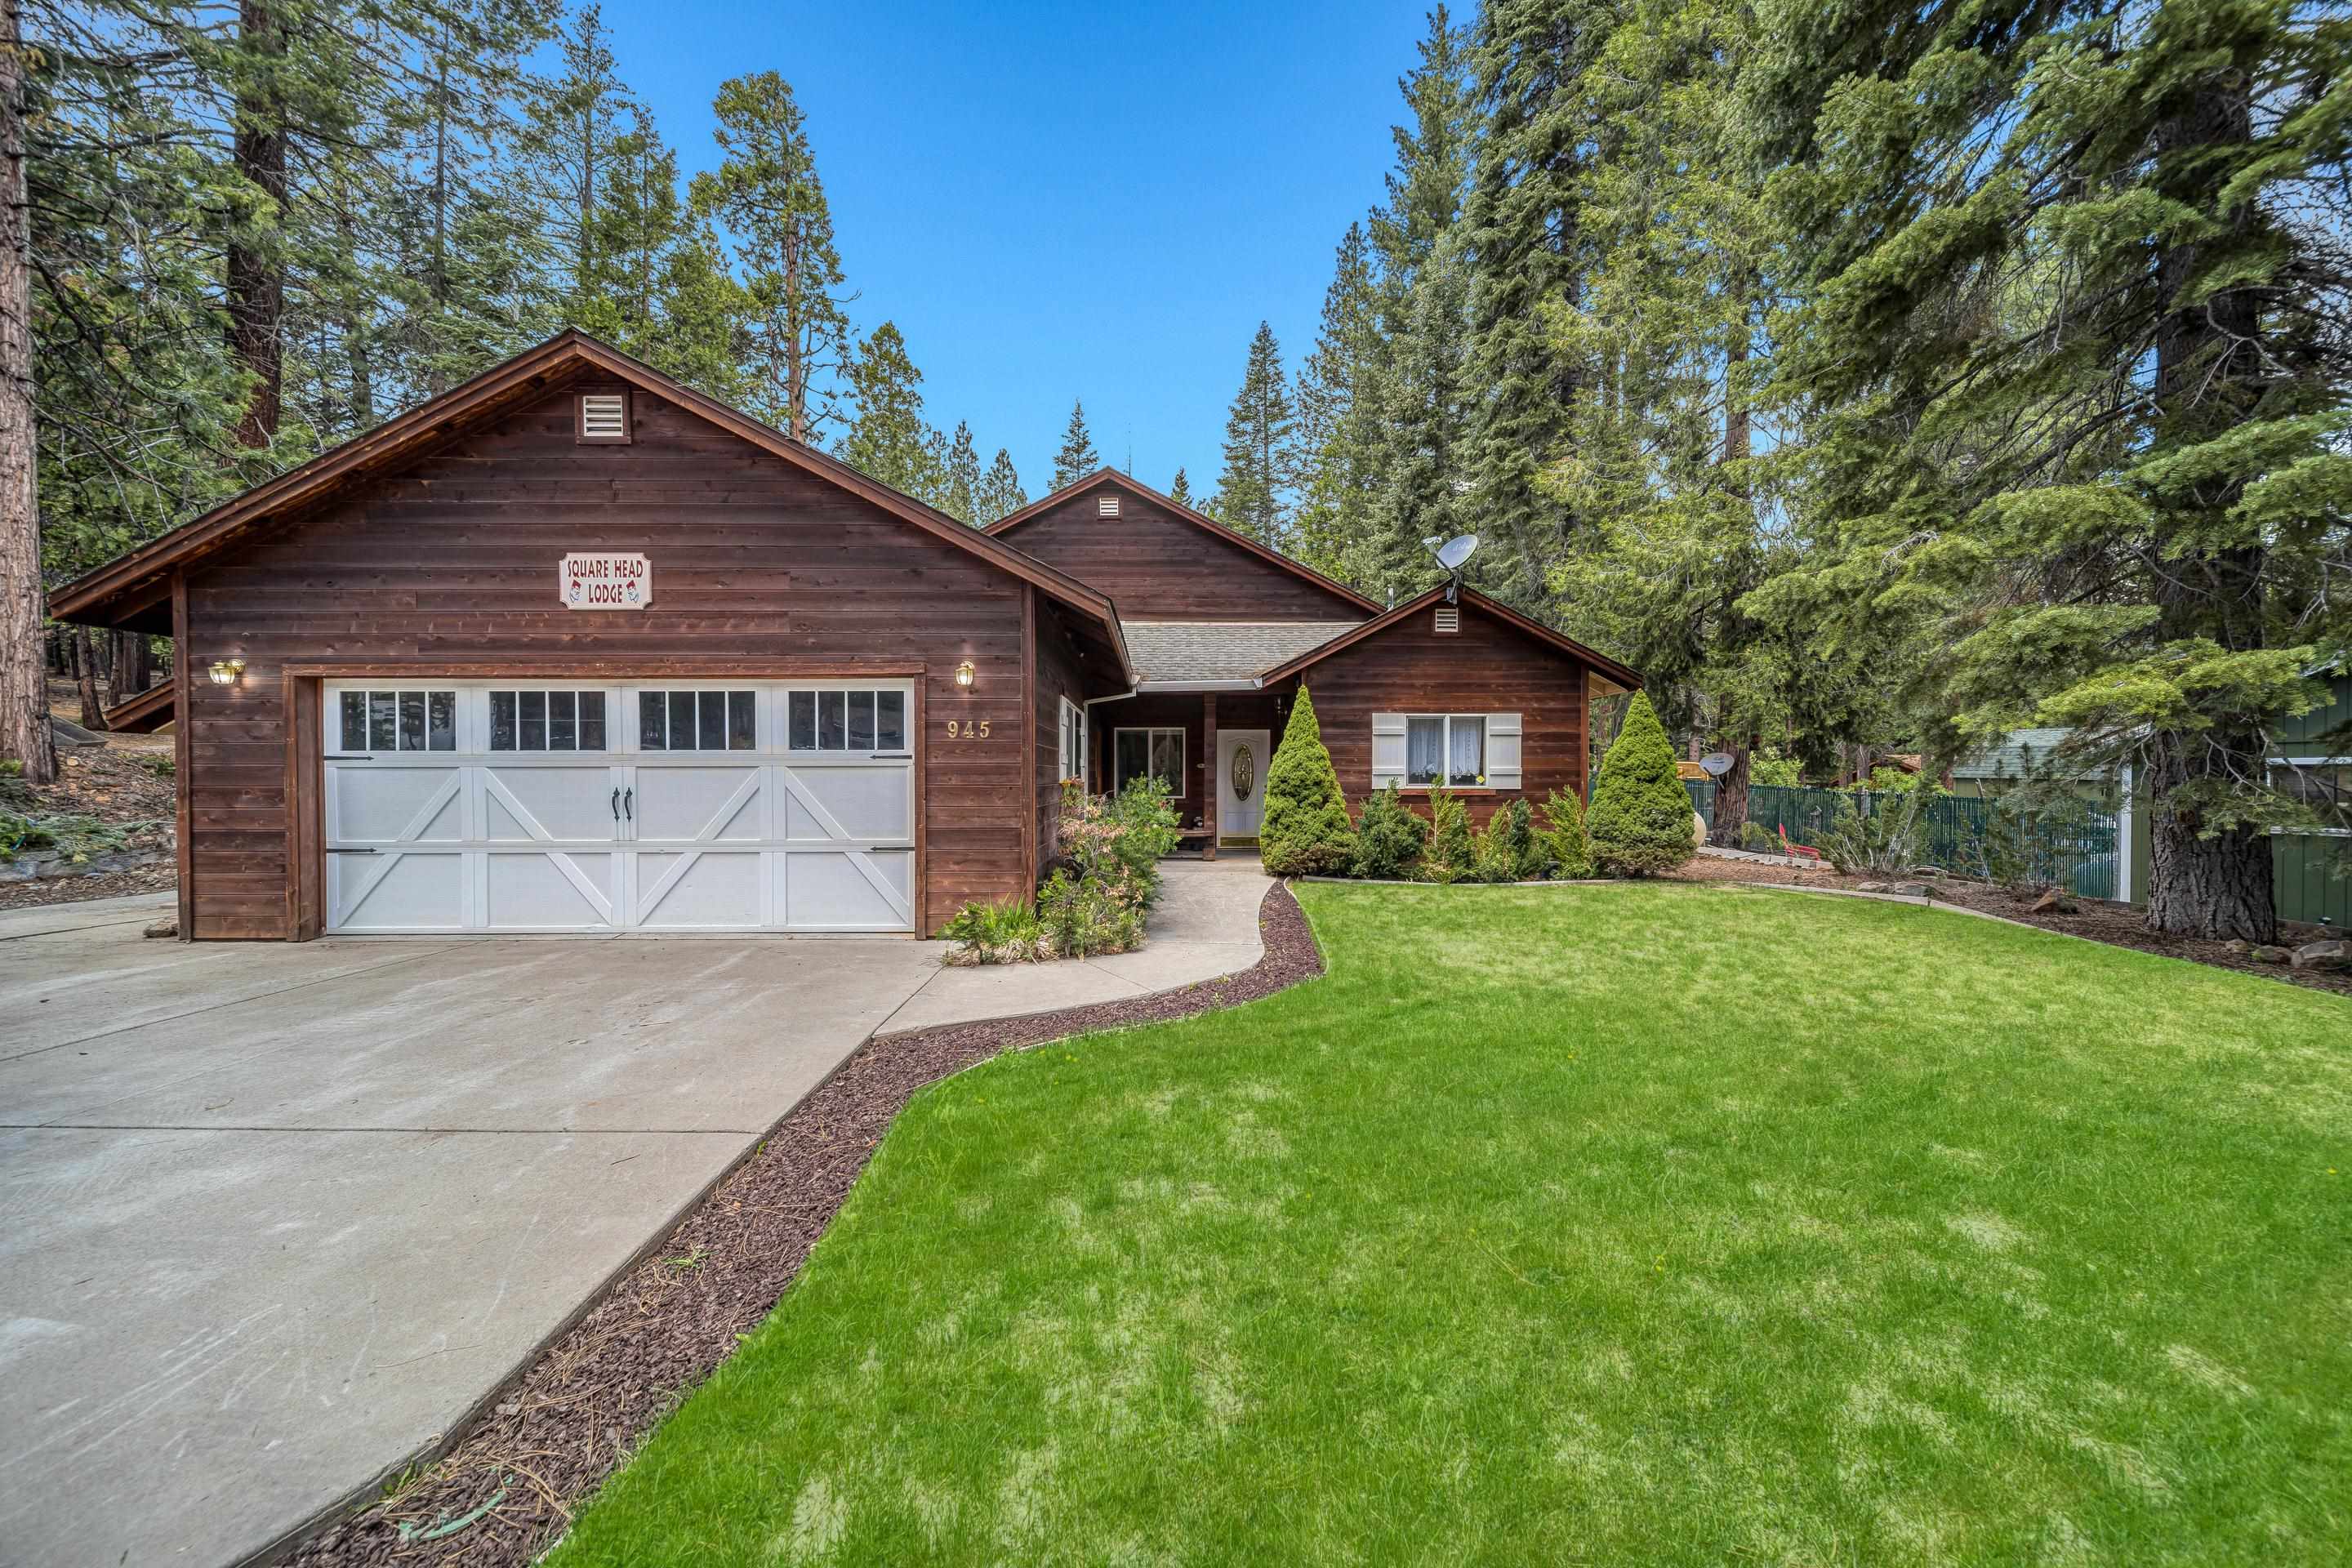 945 Long Iron Drive, Chester, CA 96020